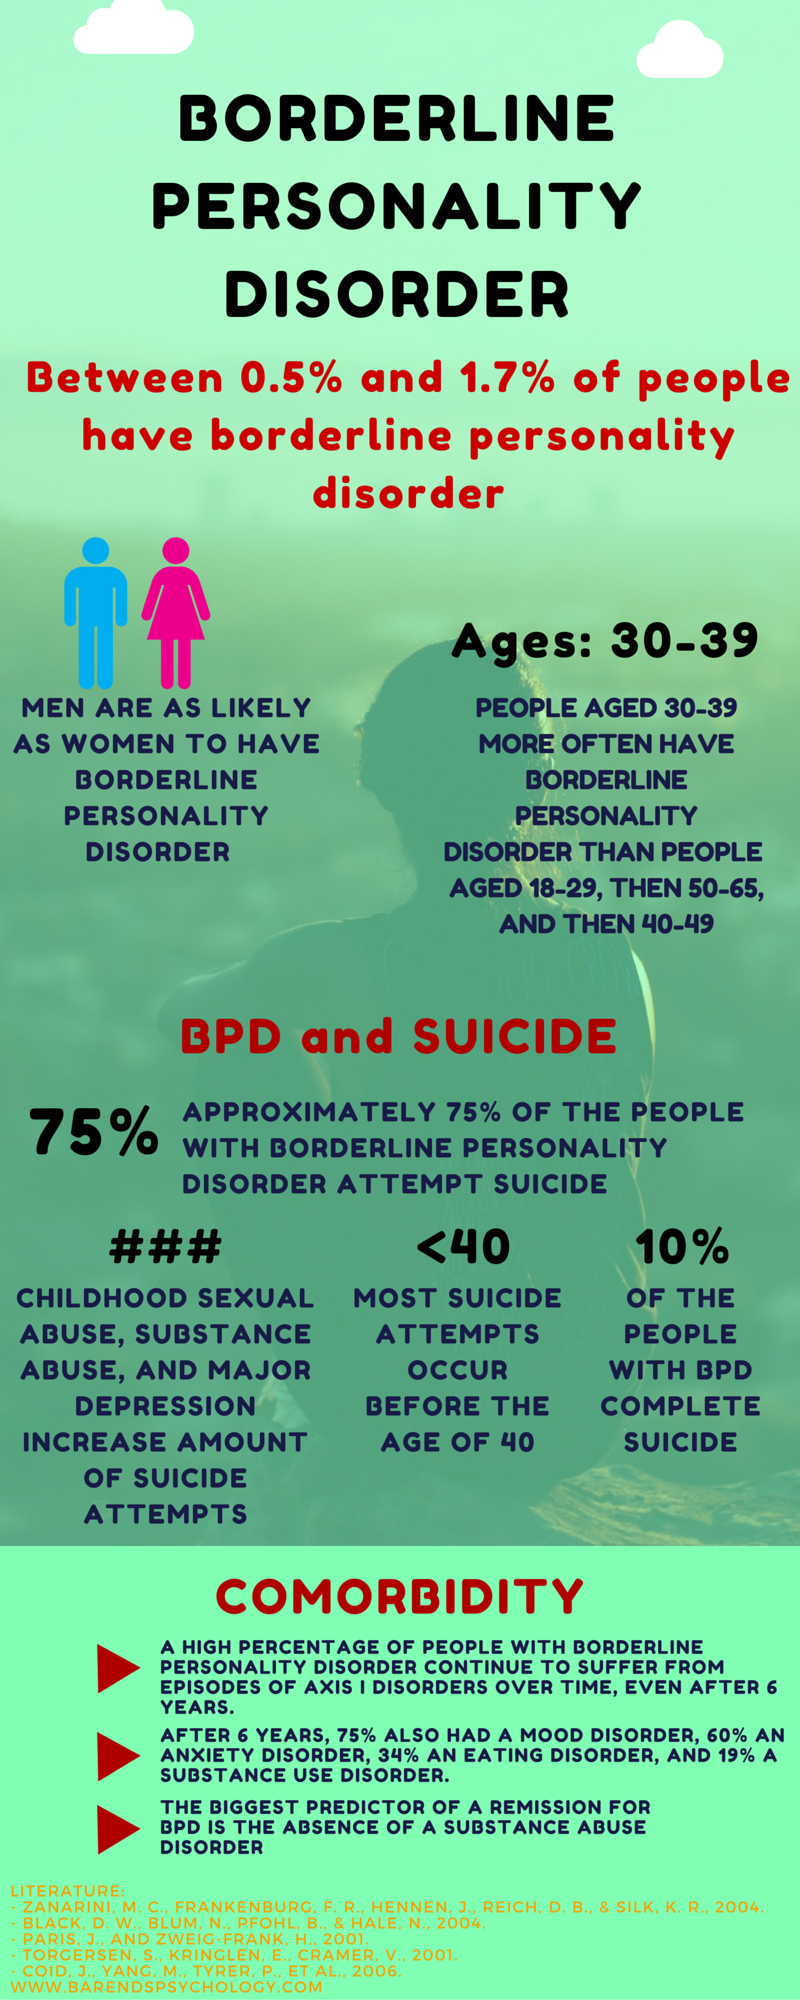 living with someone with borderline personality disorder: tips and